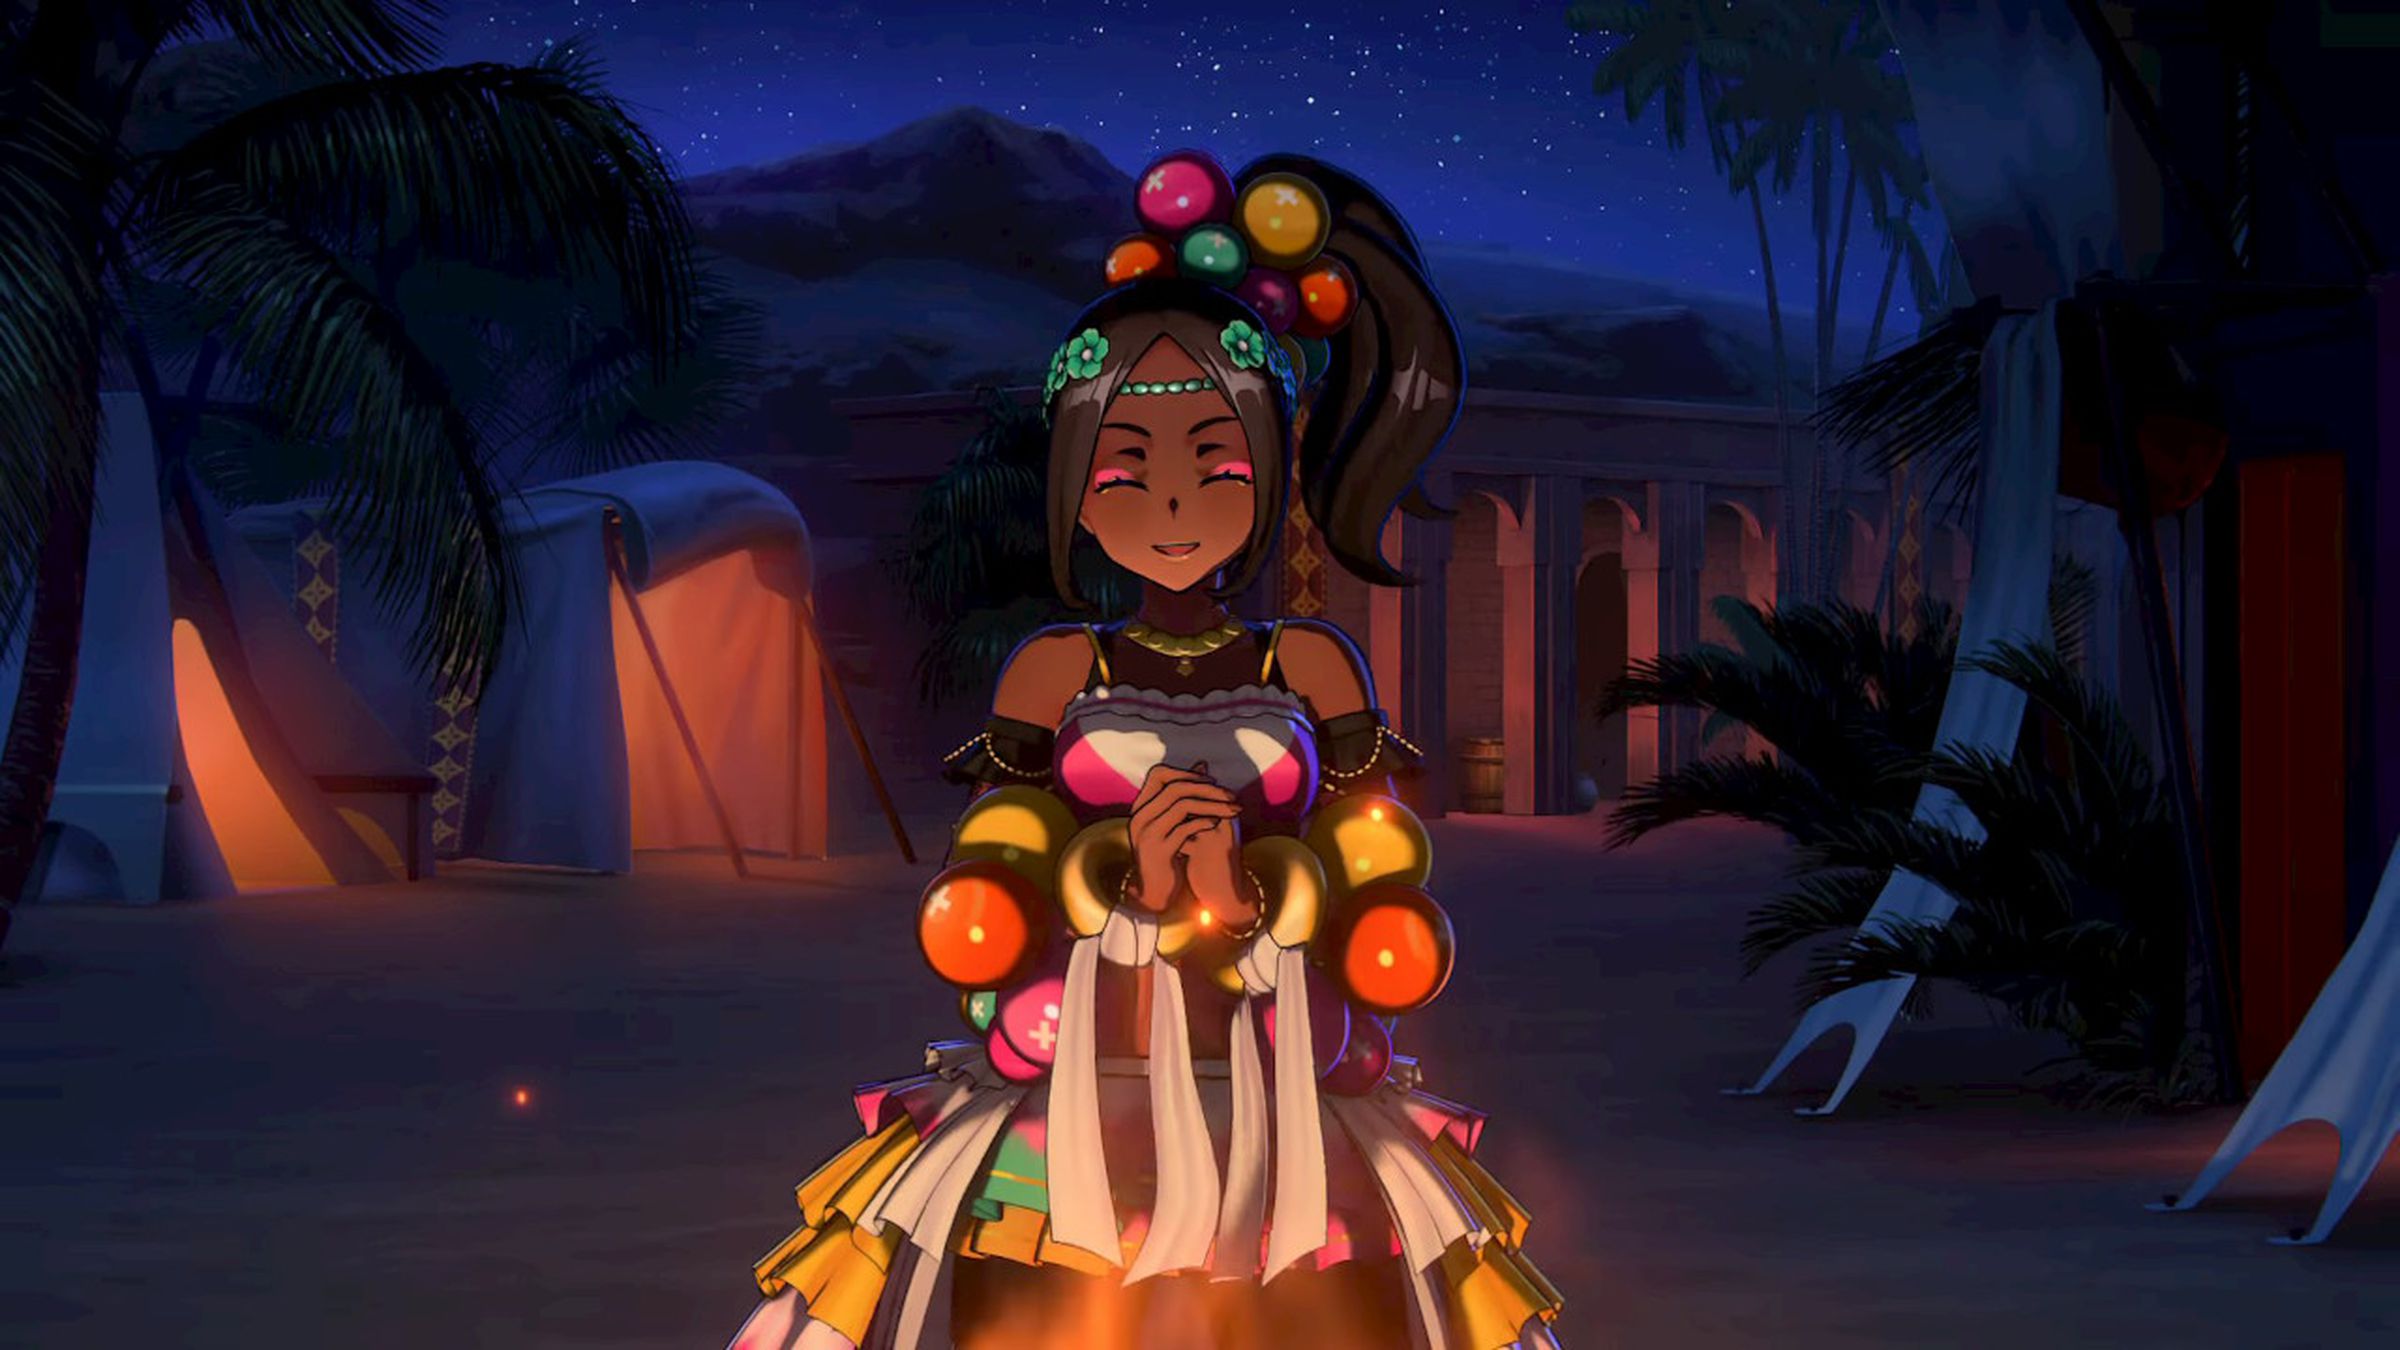 Screenshot from Fire Emblem Engage featuring a dark-skinned woman with a joyful expression on her face dressed in colorful balls